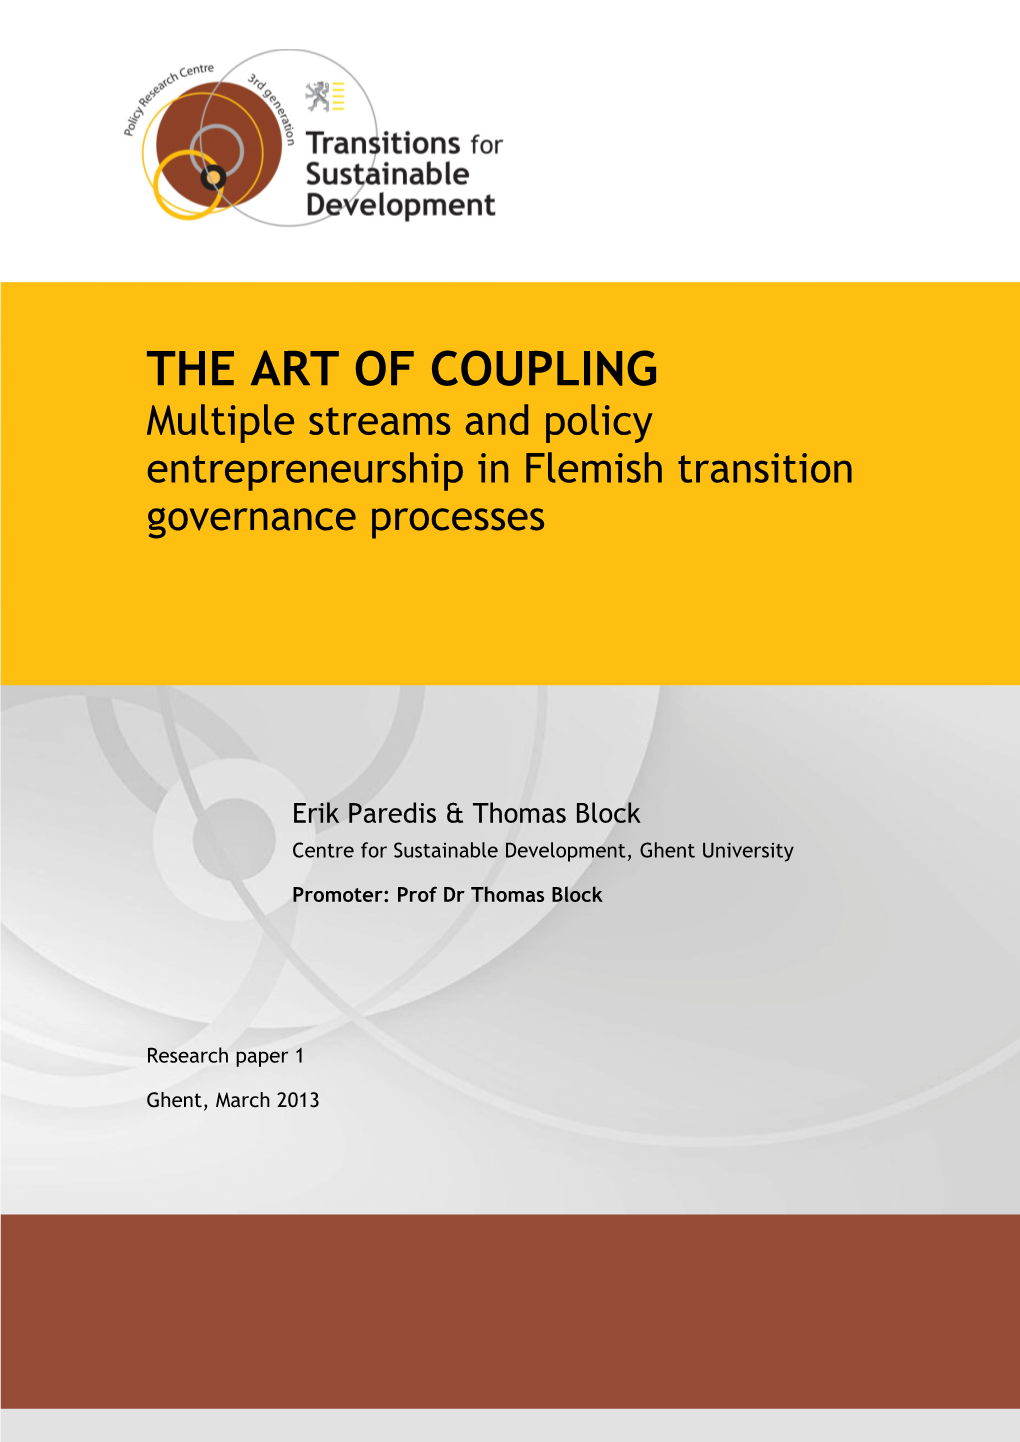 THE ART of COUPLING Multiple Streams and Policy Entrepreneurship in Flemish Transition Governance Processes